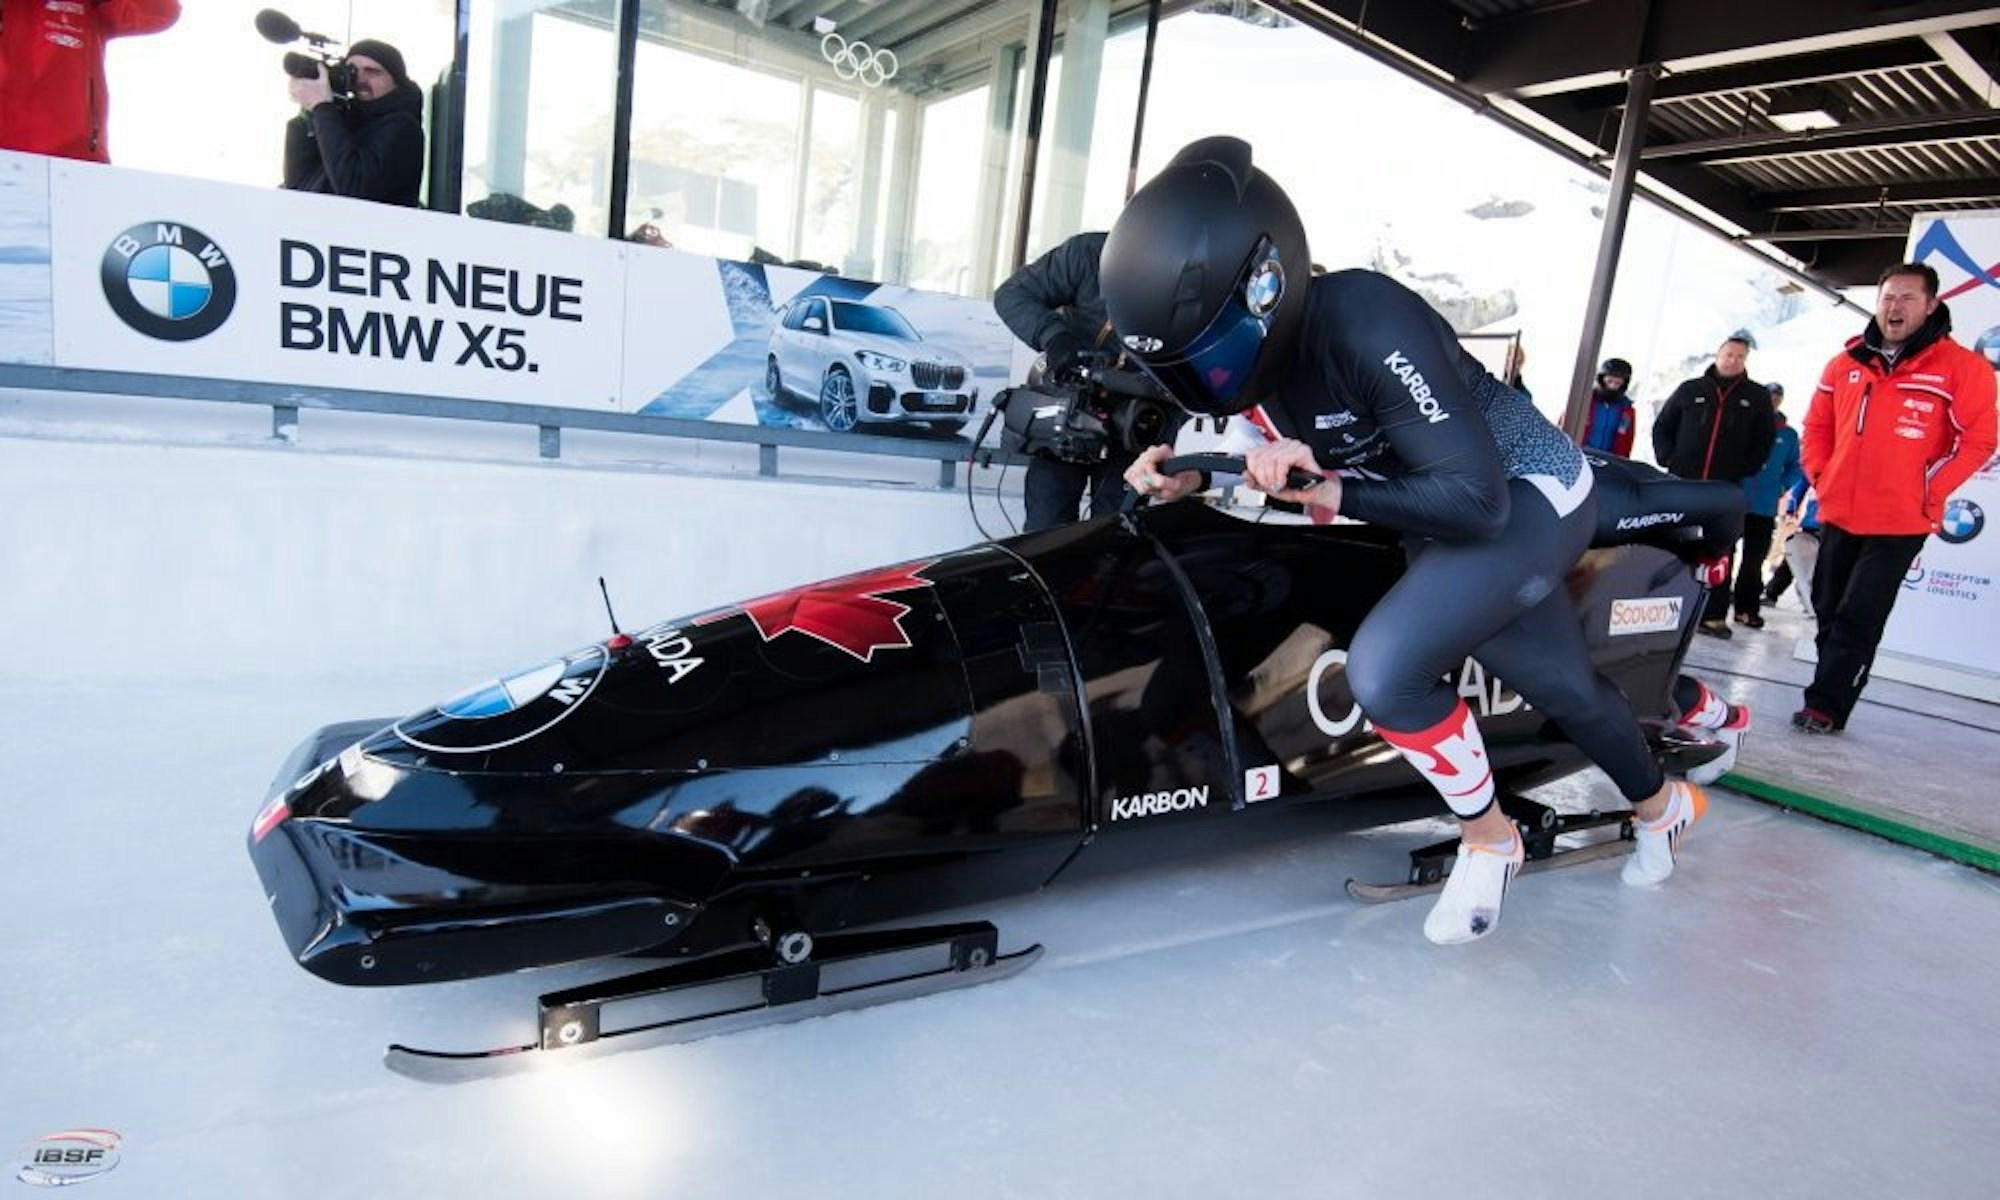 An action shot of Alysia Rissling pushing a bobsled.